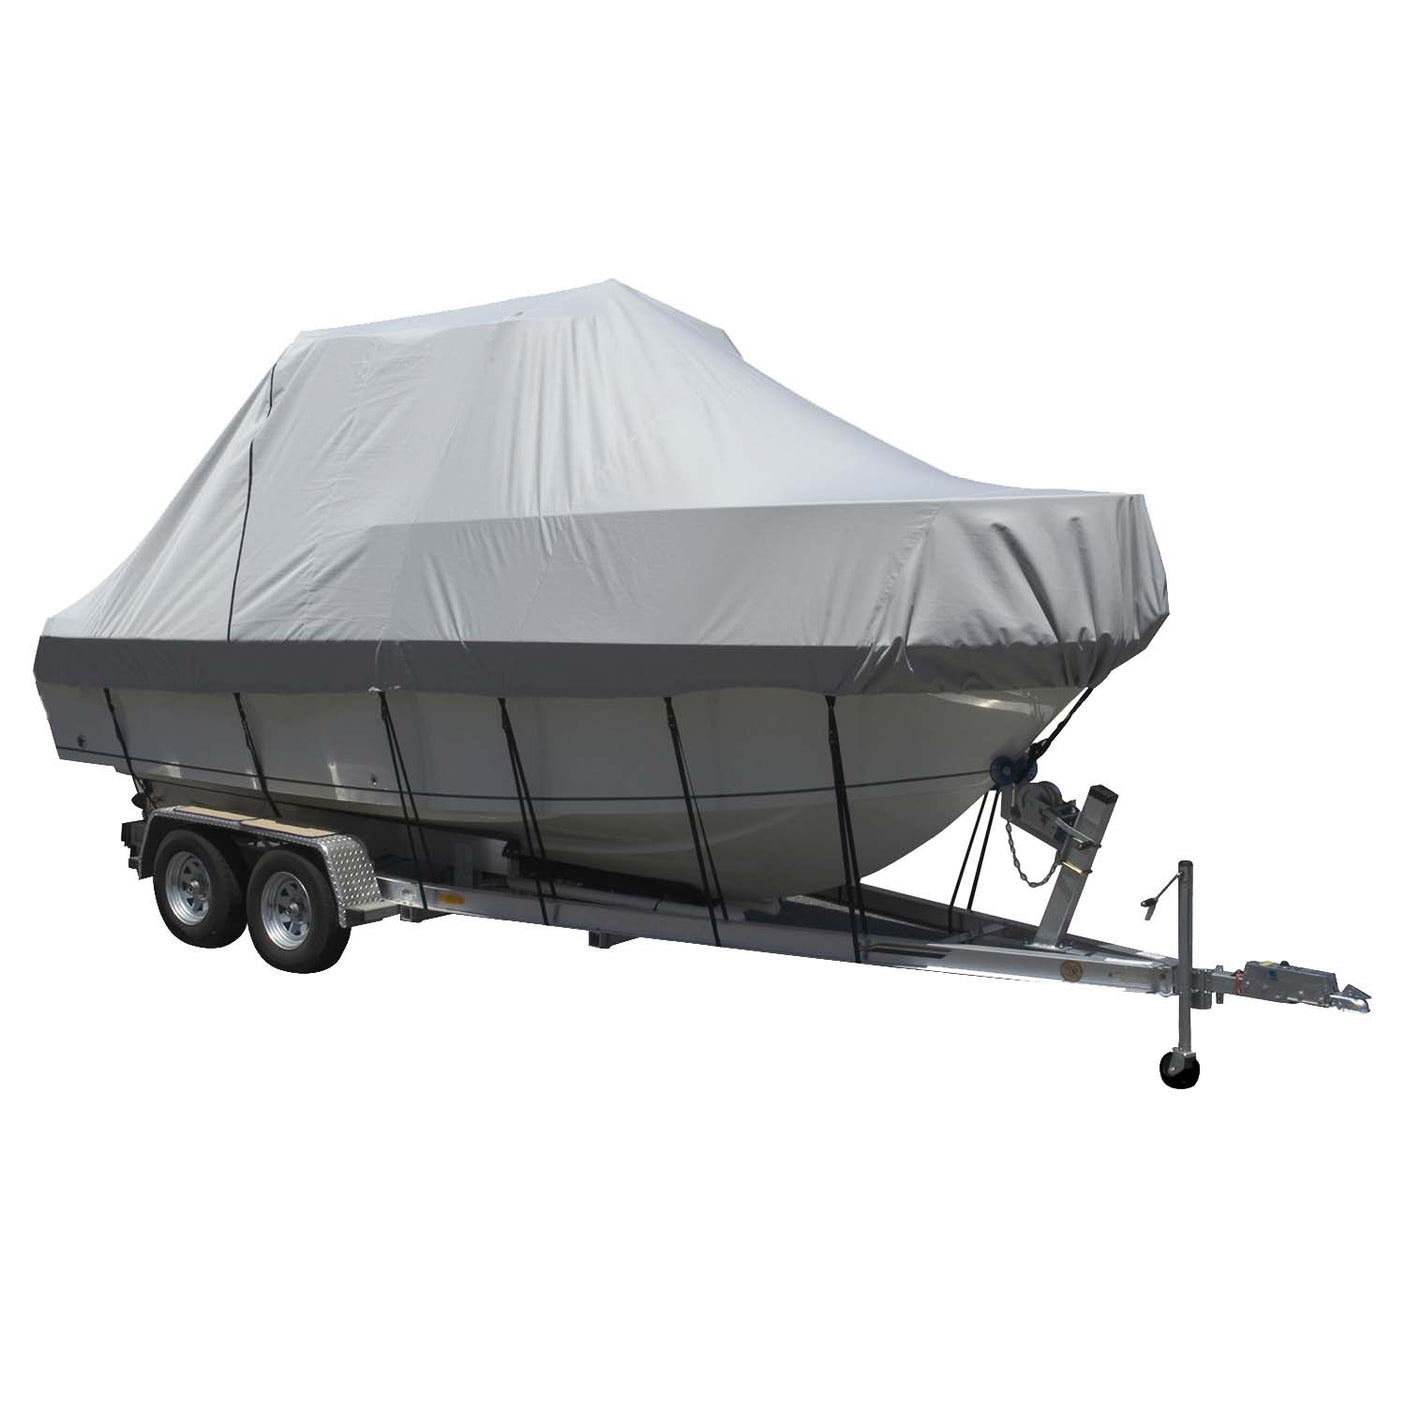 Carver Sun-DURA Specialty Boat Cover f/22.5 Walk Around Cuddy Center Console Boats - Grey - Life Raft Professionals